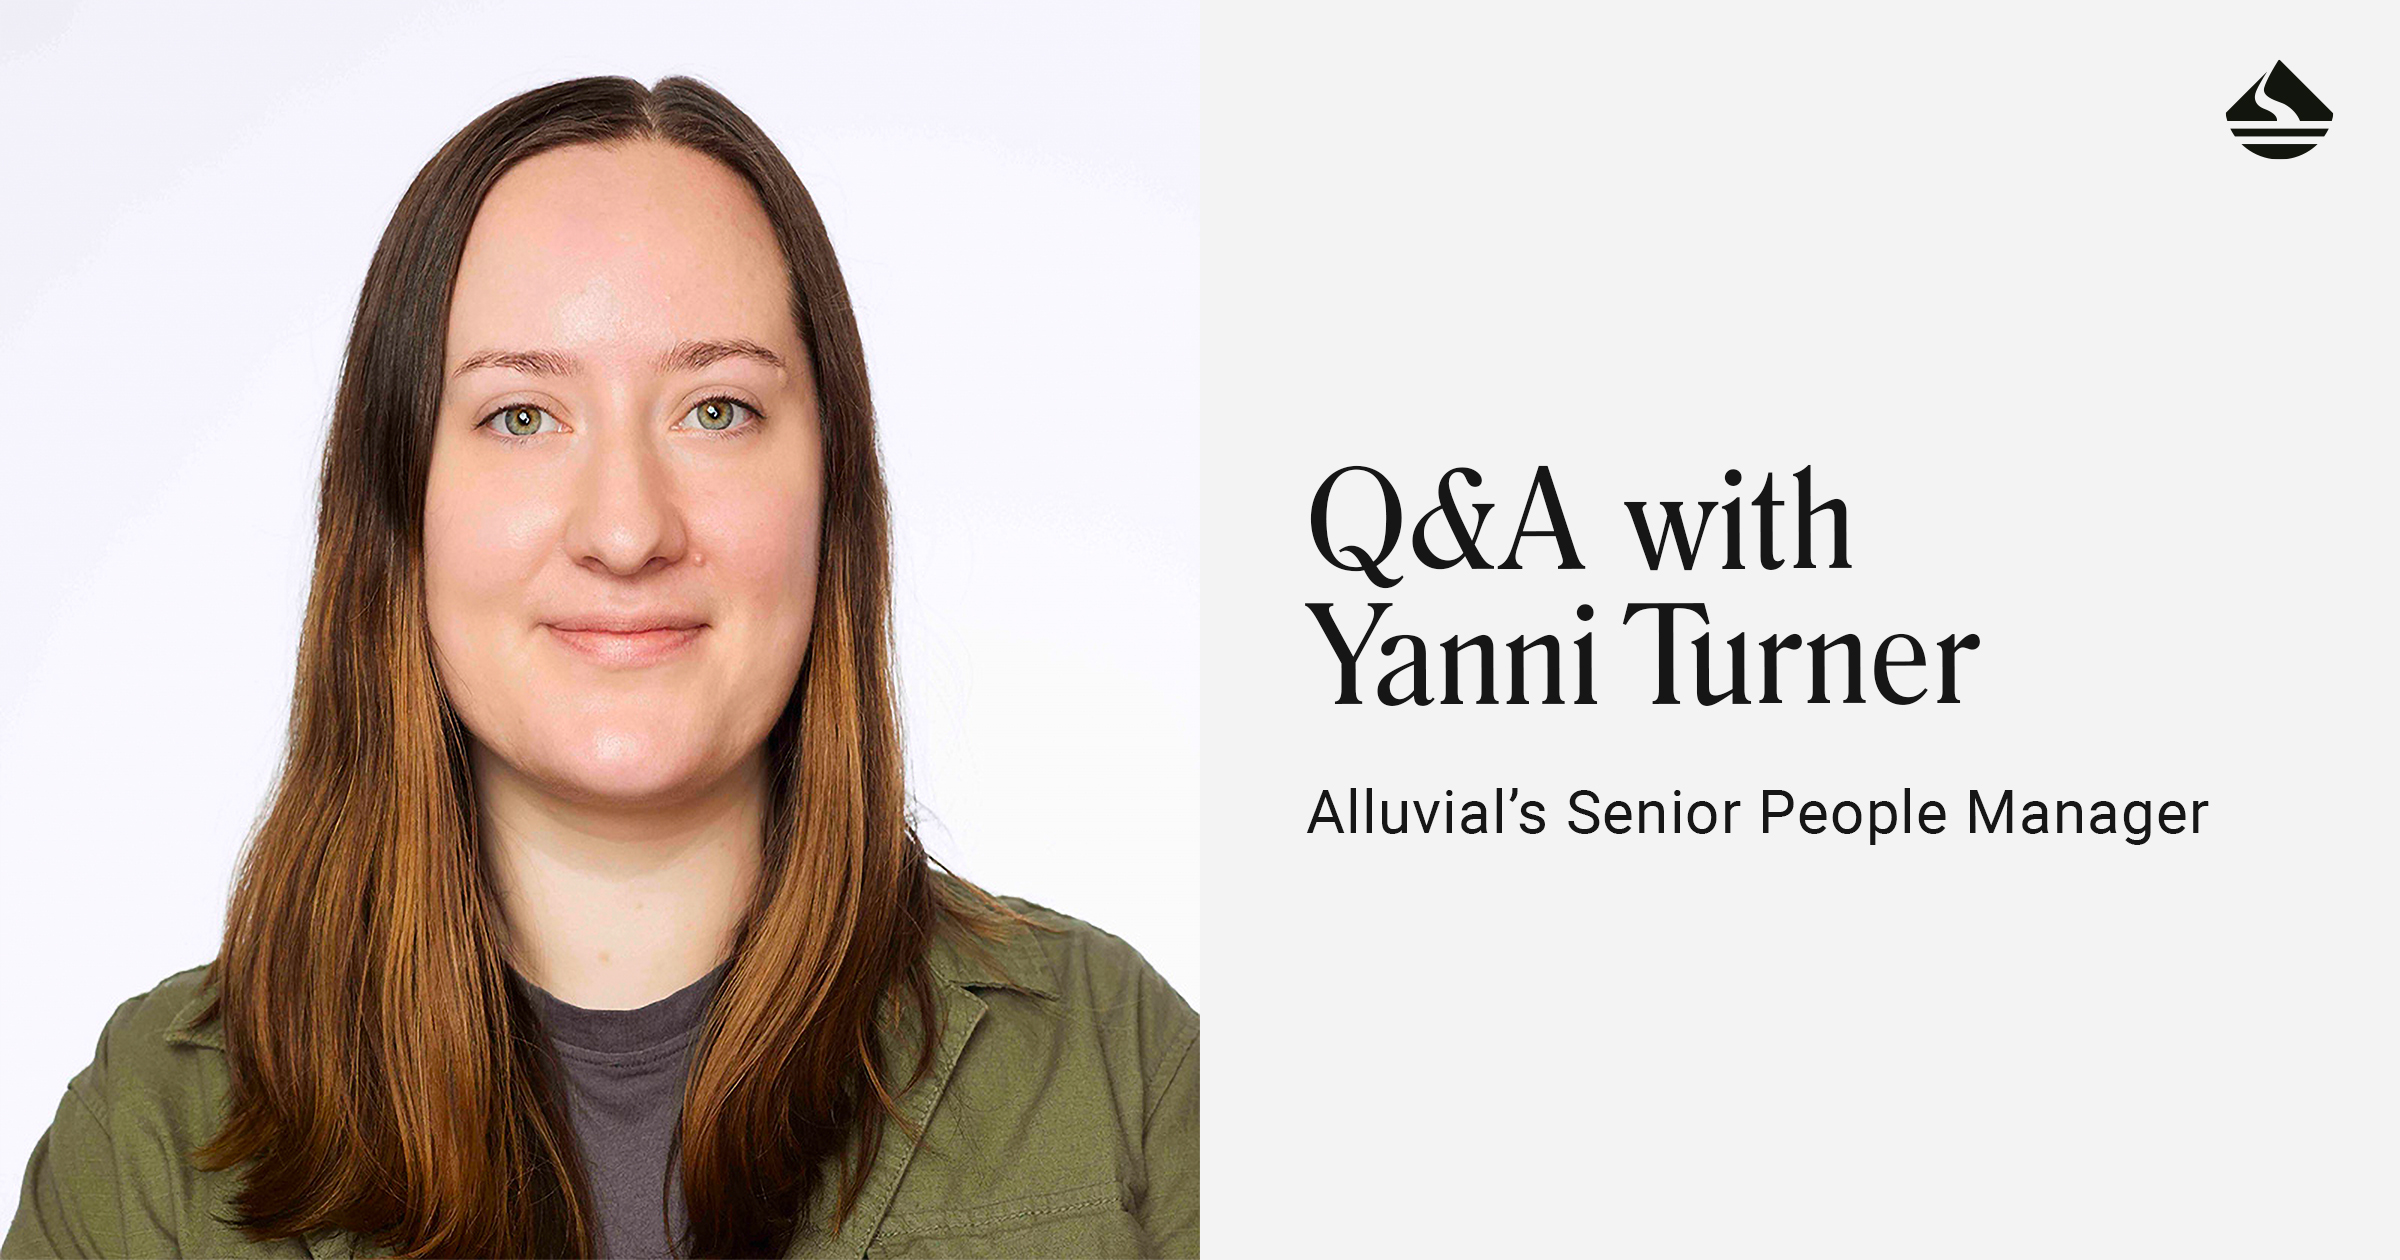 Q&A with Yanni Turner, Alluvial’s Senior People Manager